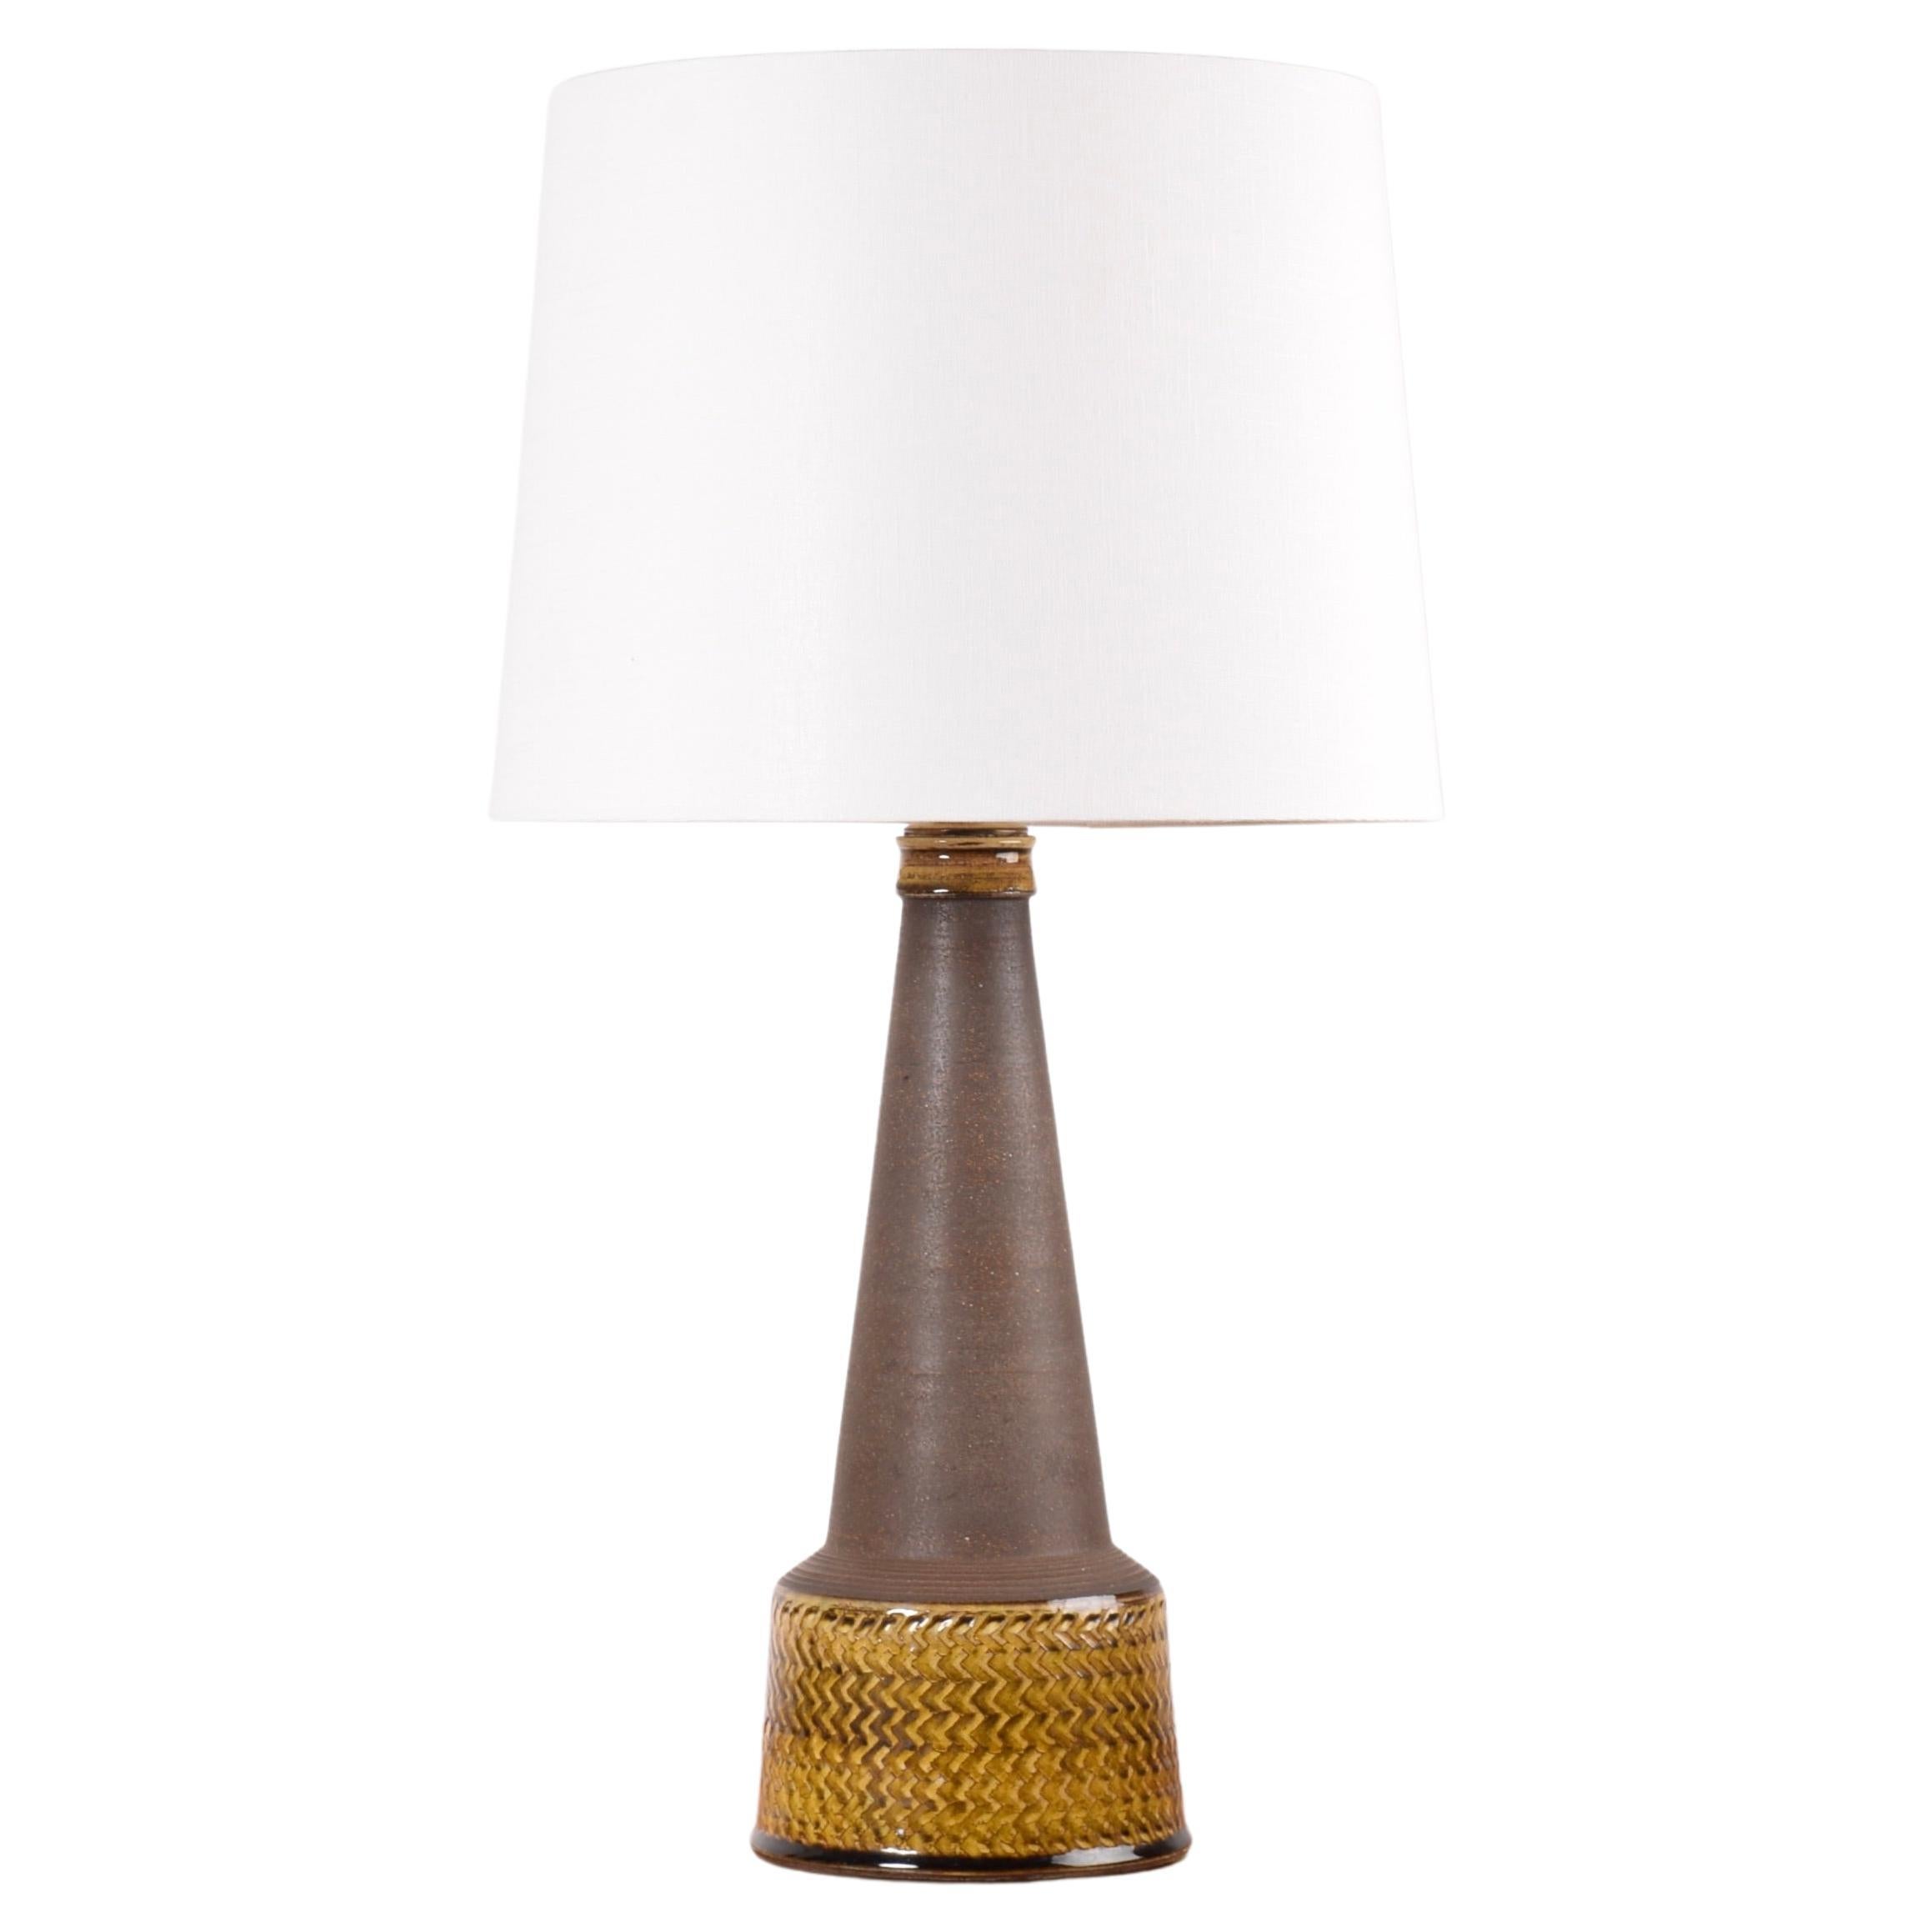 Danish Kähler HAK Tall Table Lamp Brown and Warm Yellow, Modern Ceramic 1960s For Sale